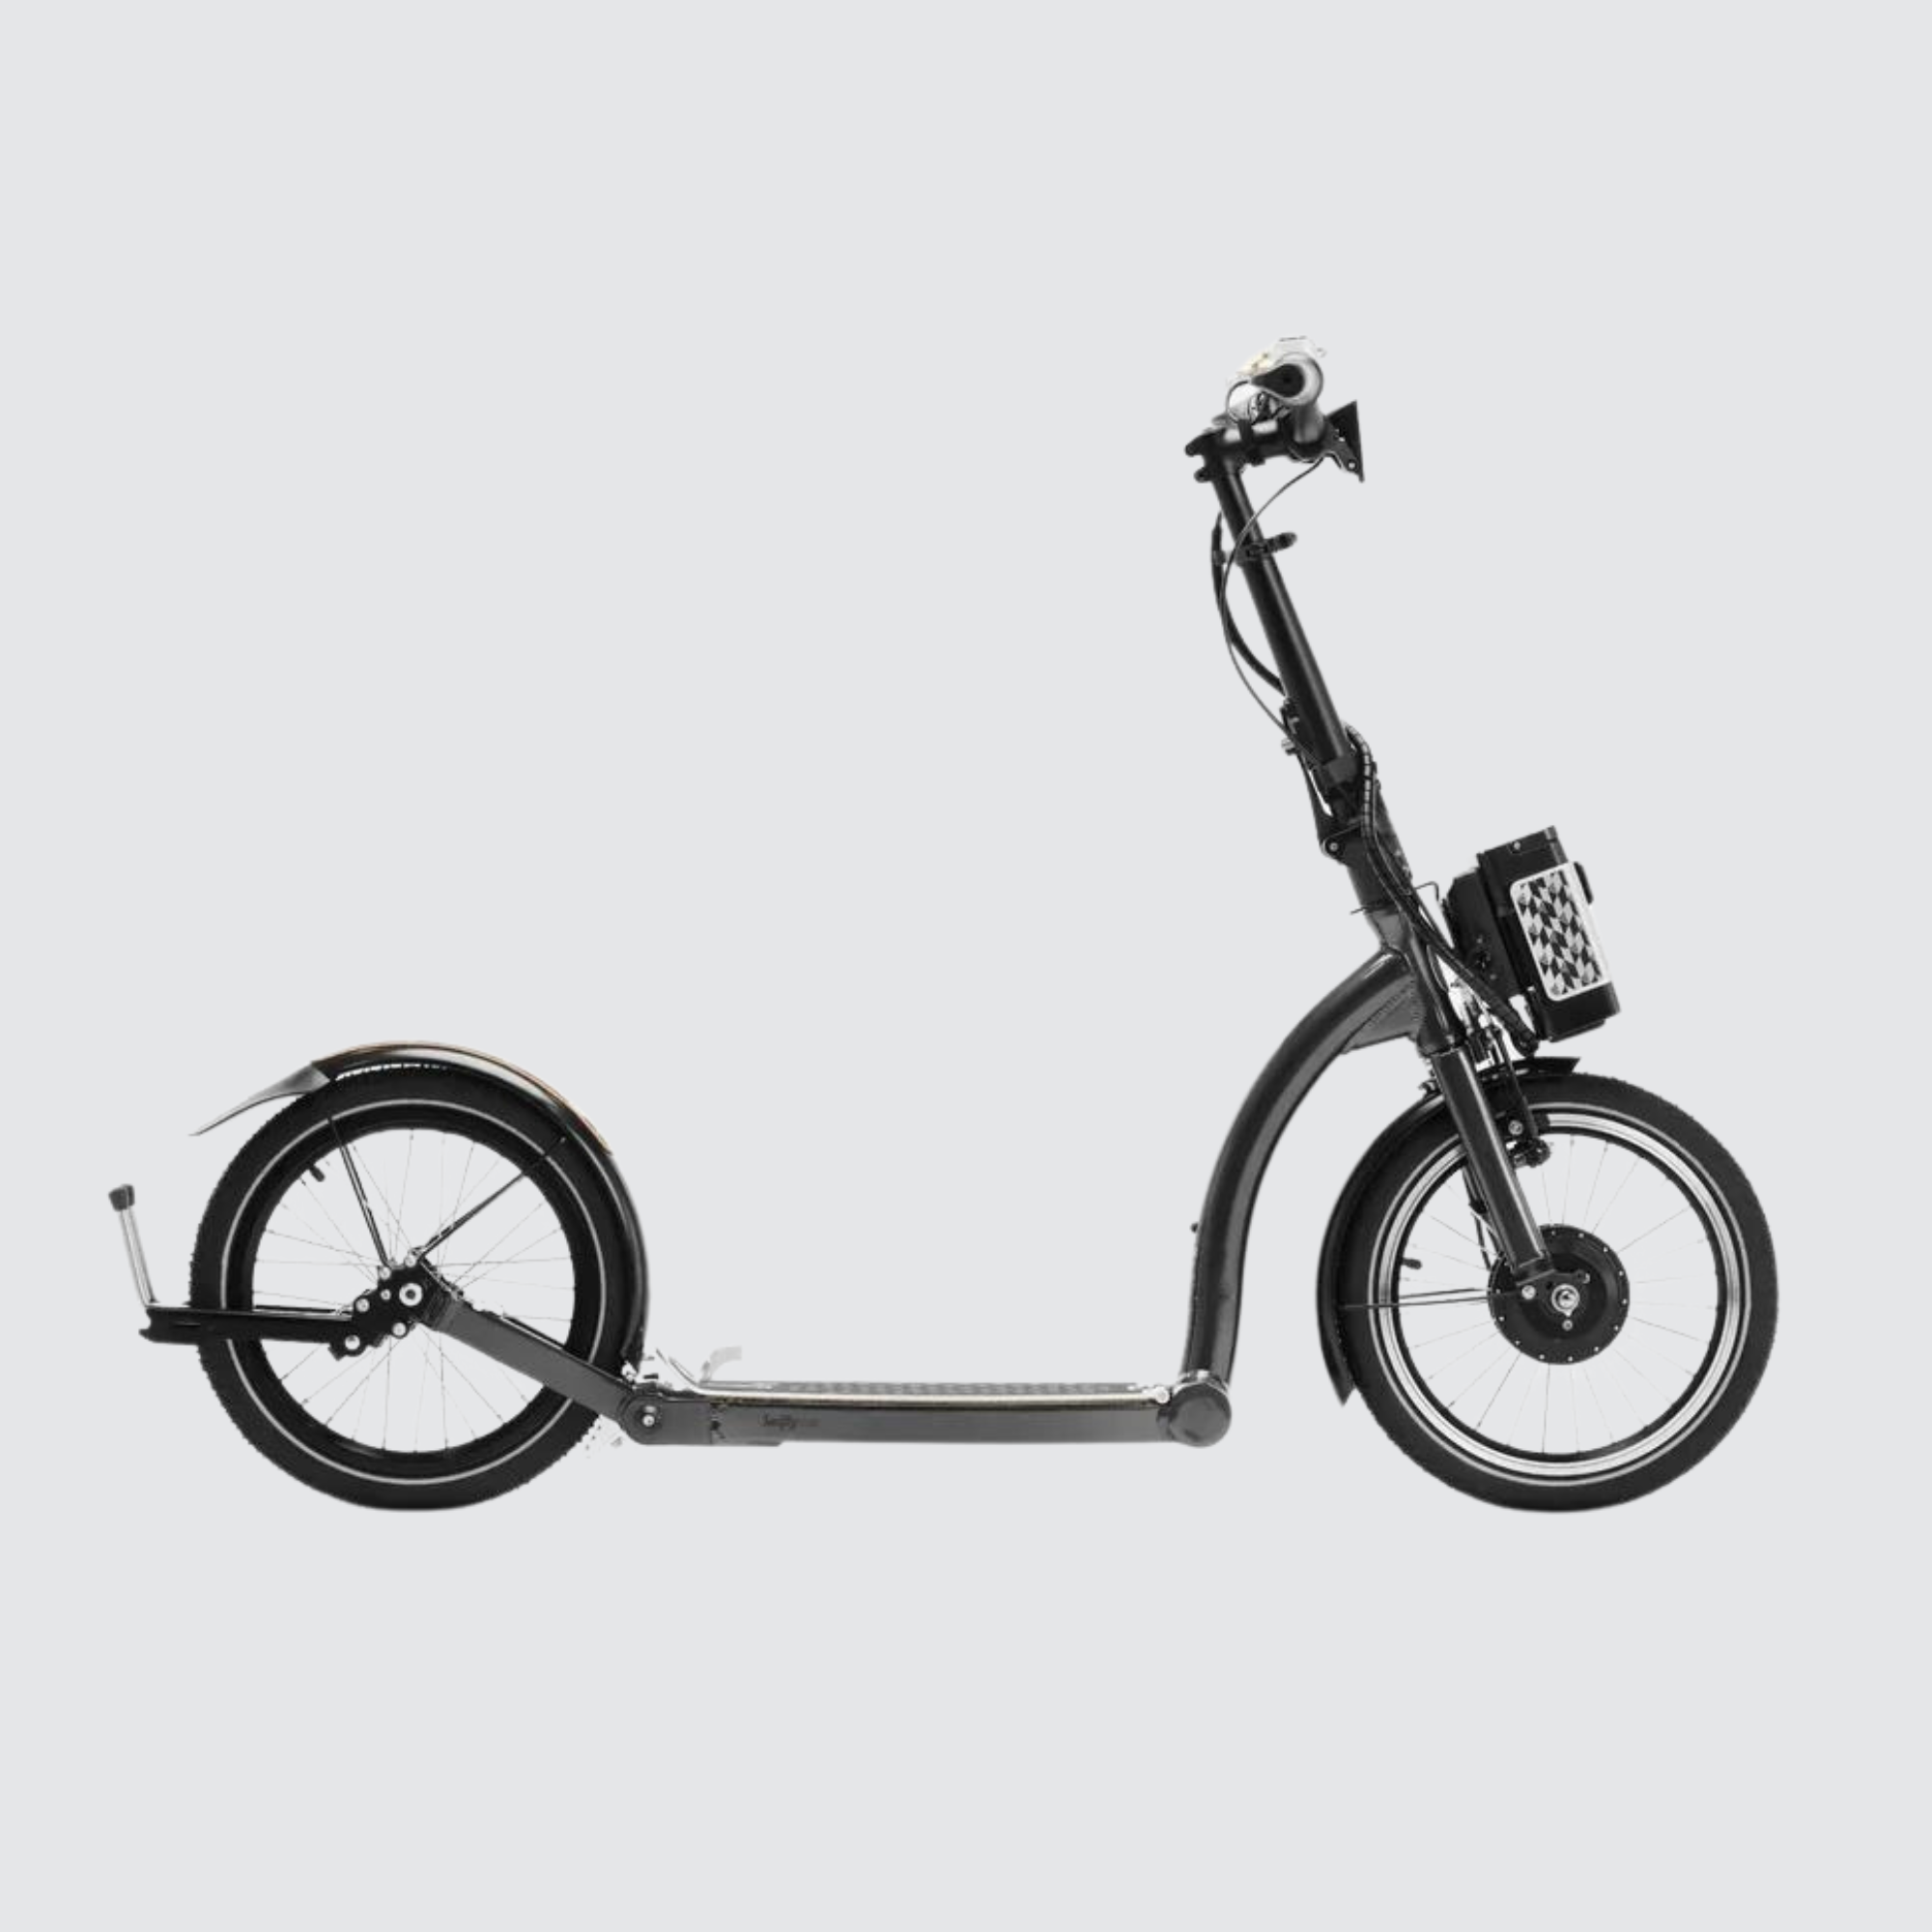 swifty one e scooter electric uk black